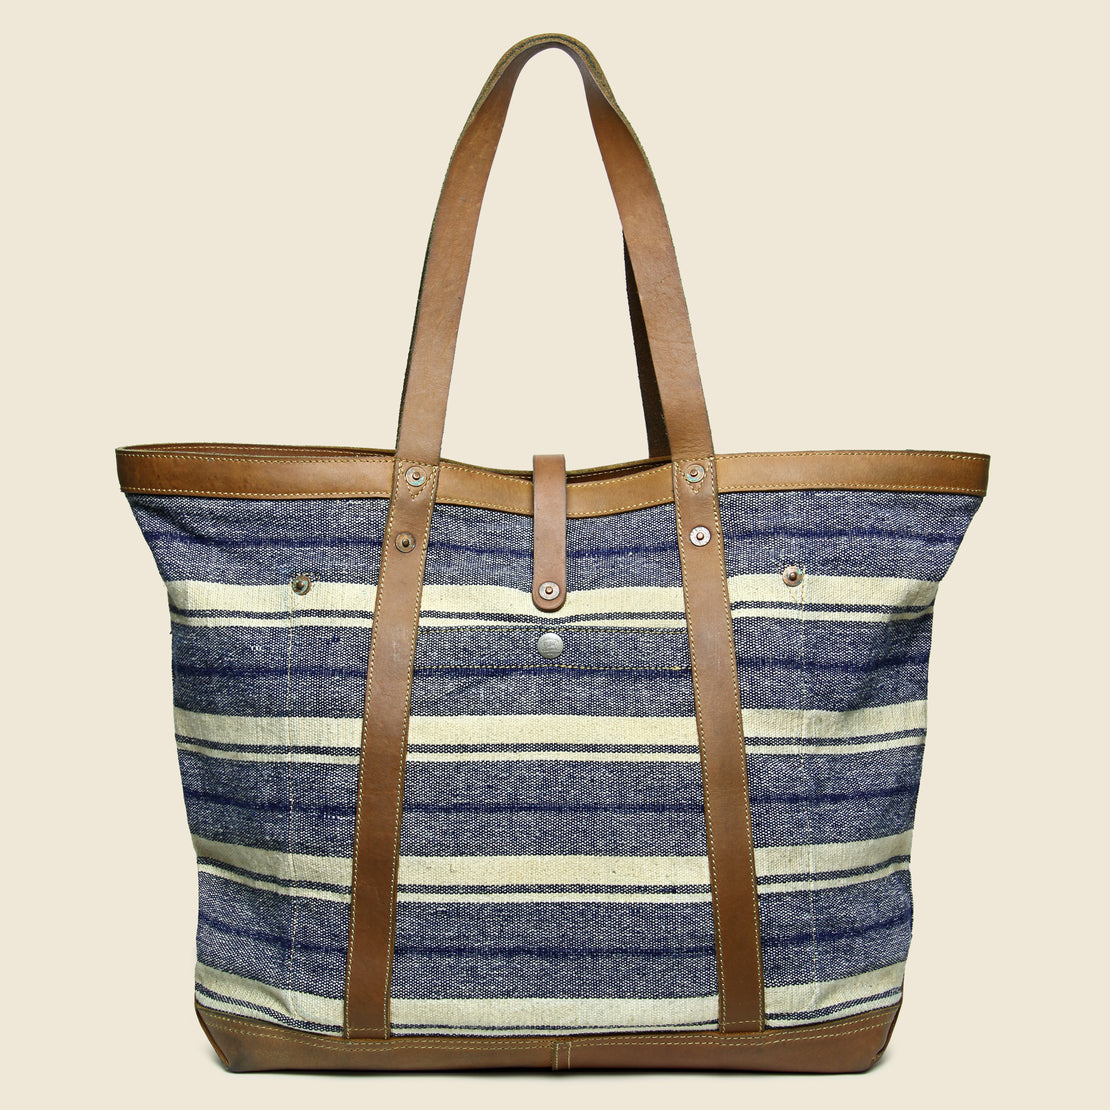 Murphy Canvas Tote - Indigo/Tan - RRL - STAG Provisions - Accessories - Bags / Luggage